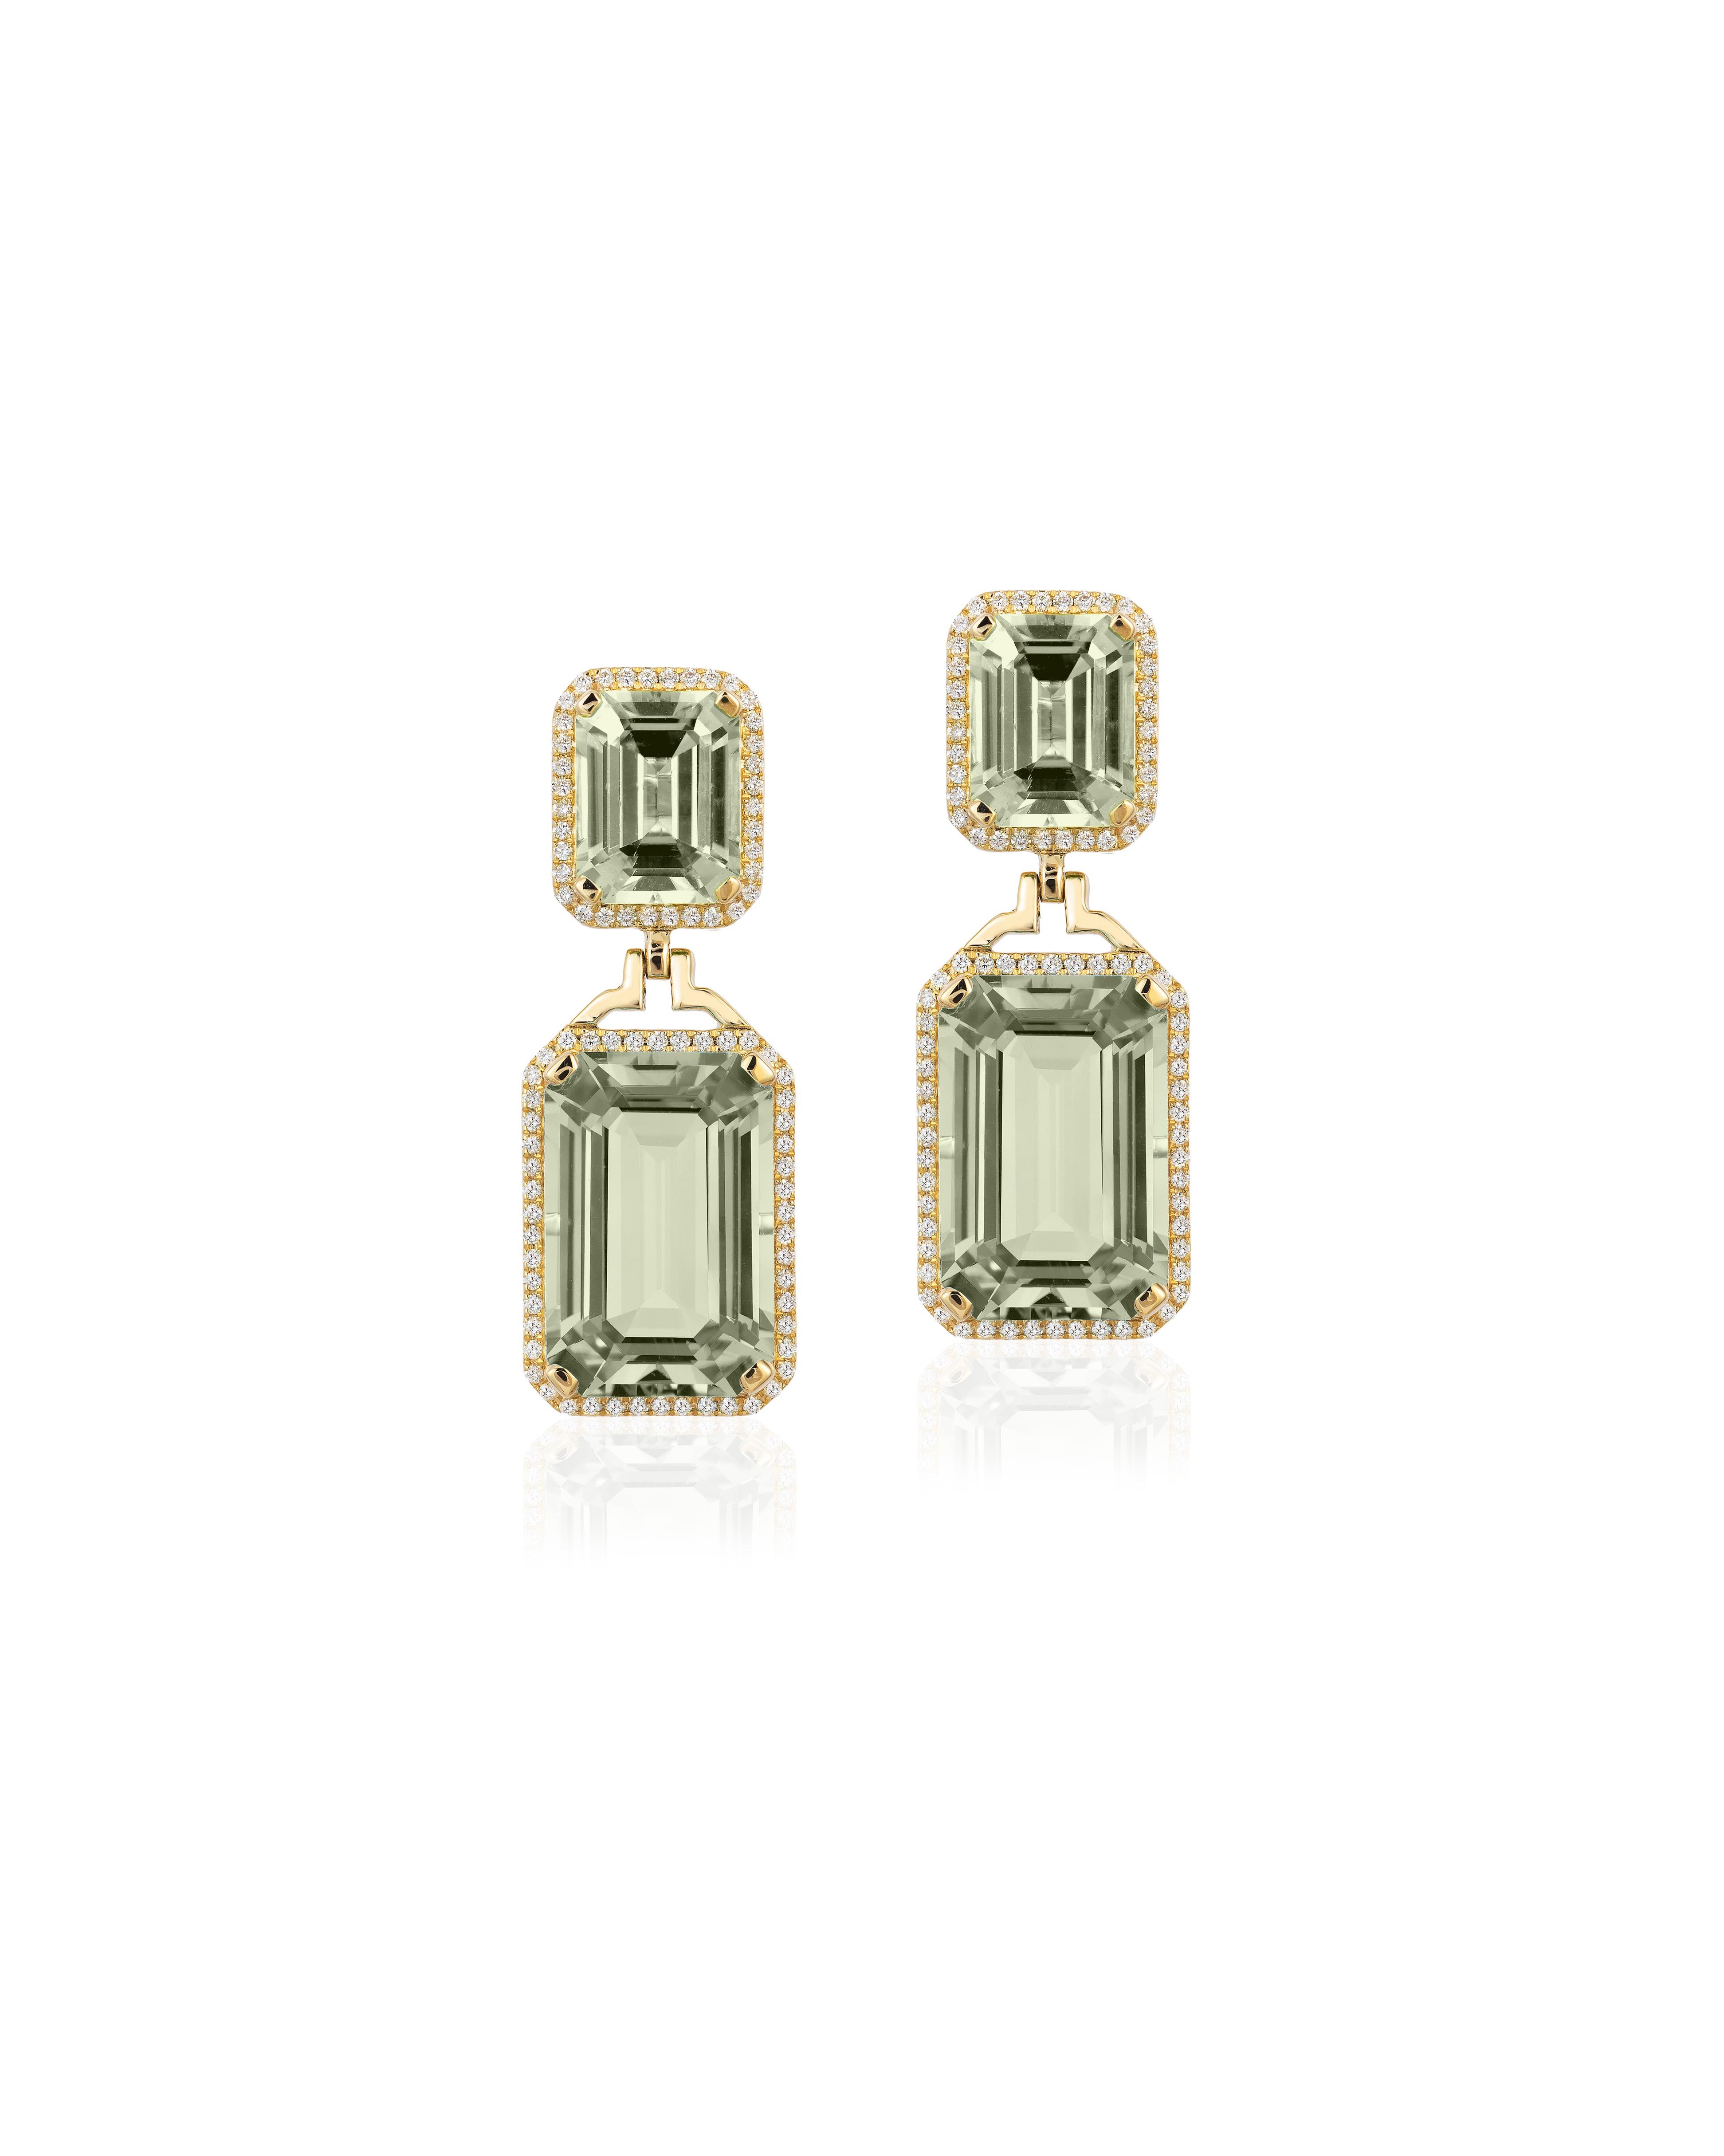 Prasiolite in Emerald Cut Earrings with Diamonds in 18k Yellow Gold, from ‘Gossip’ Collection
Stone Size: 10 x 15 mm & 9 x 7 mm  
Gemstone Approx. Wt: Prasiolite- 16.96 Carats
Diamond: G-H/VS, Approx. Wt: 0.48 Carats